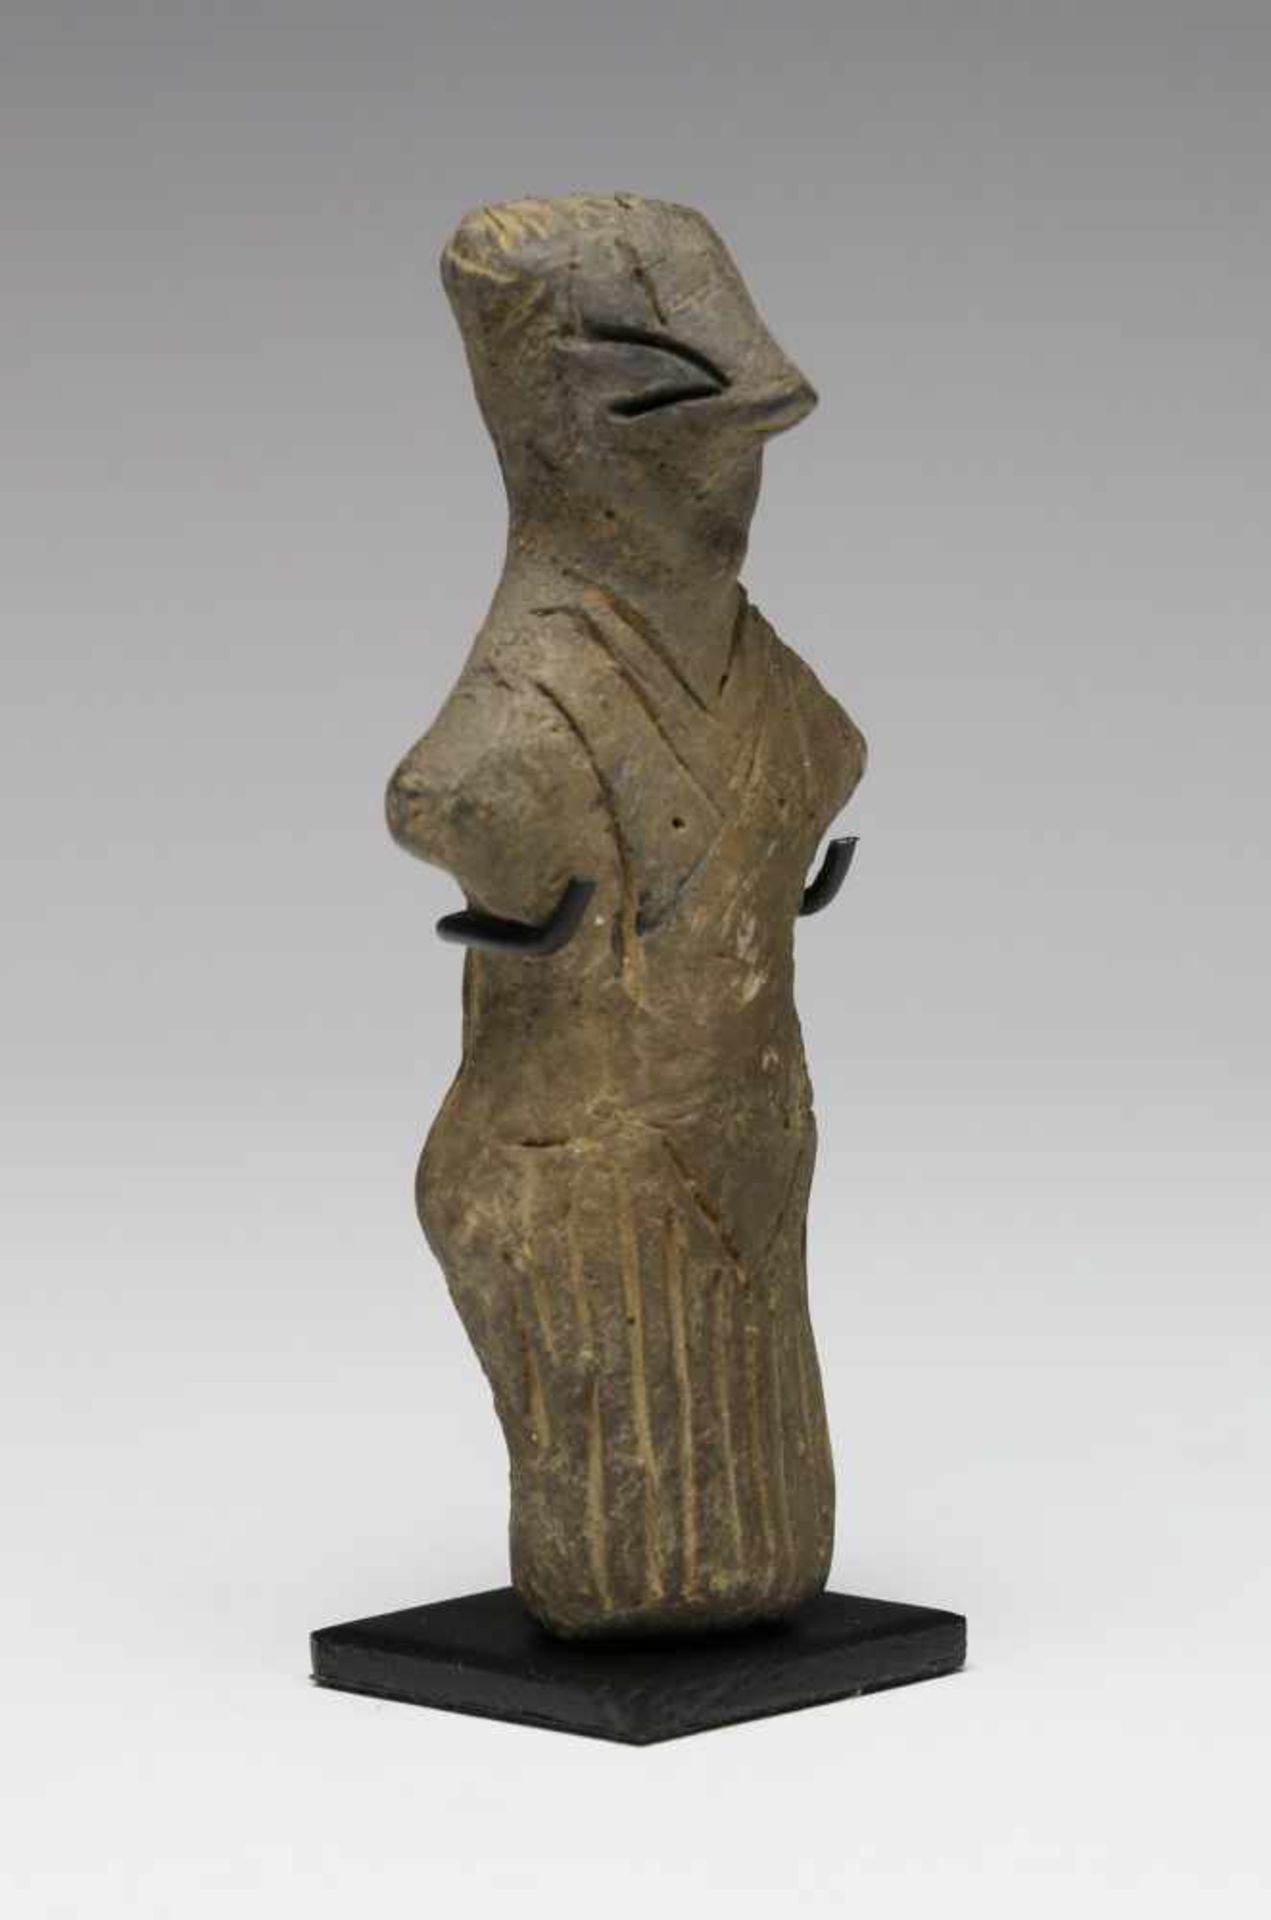 Middle Europe, Servia, Vinca culture, black-grey terracotta idol, ca. 5th-4th Mill BC,in the form of